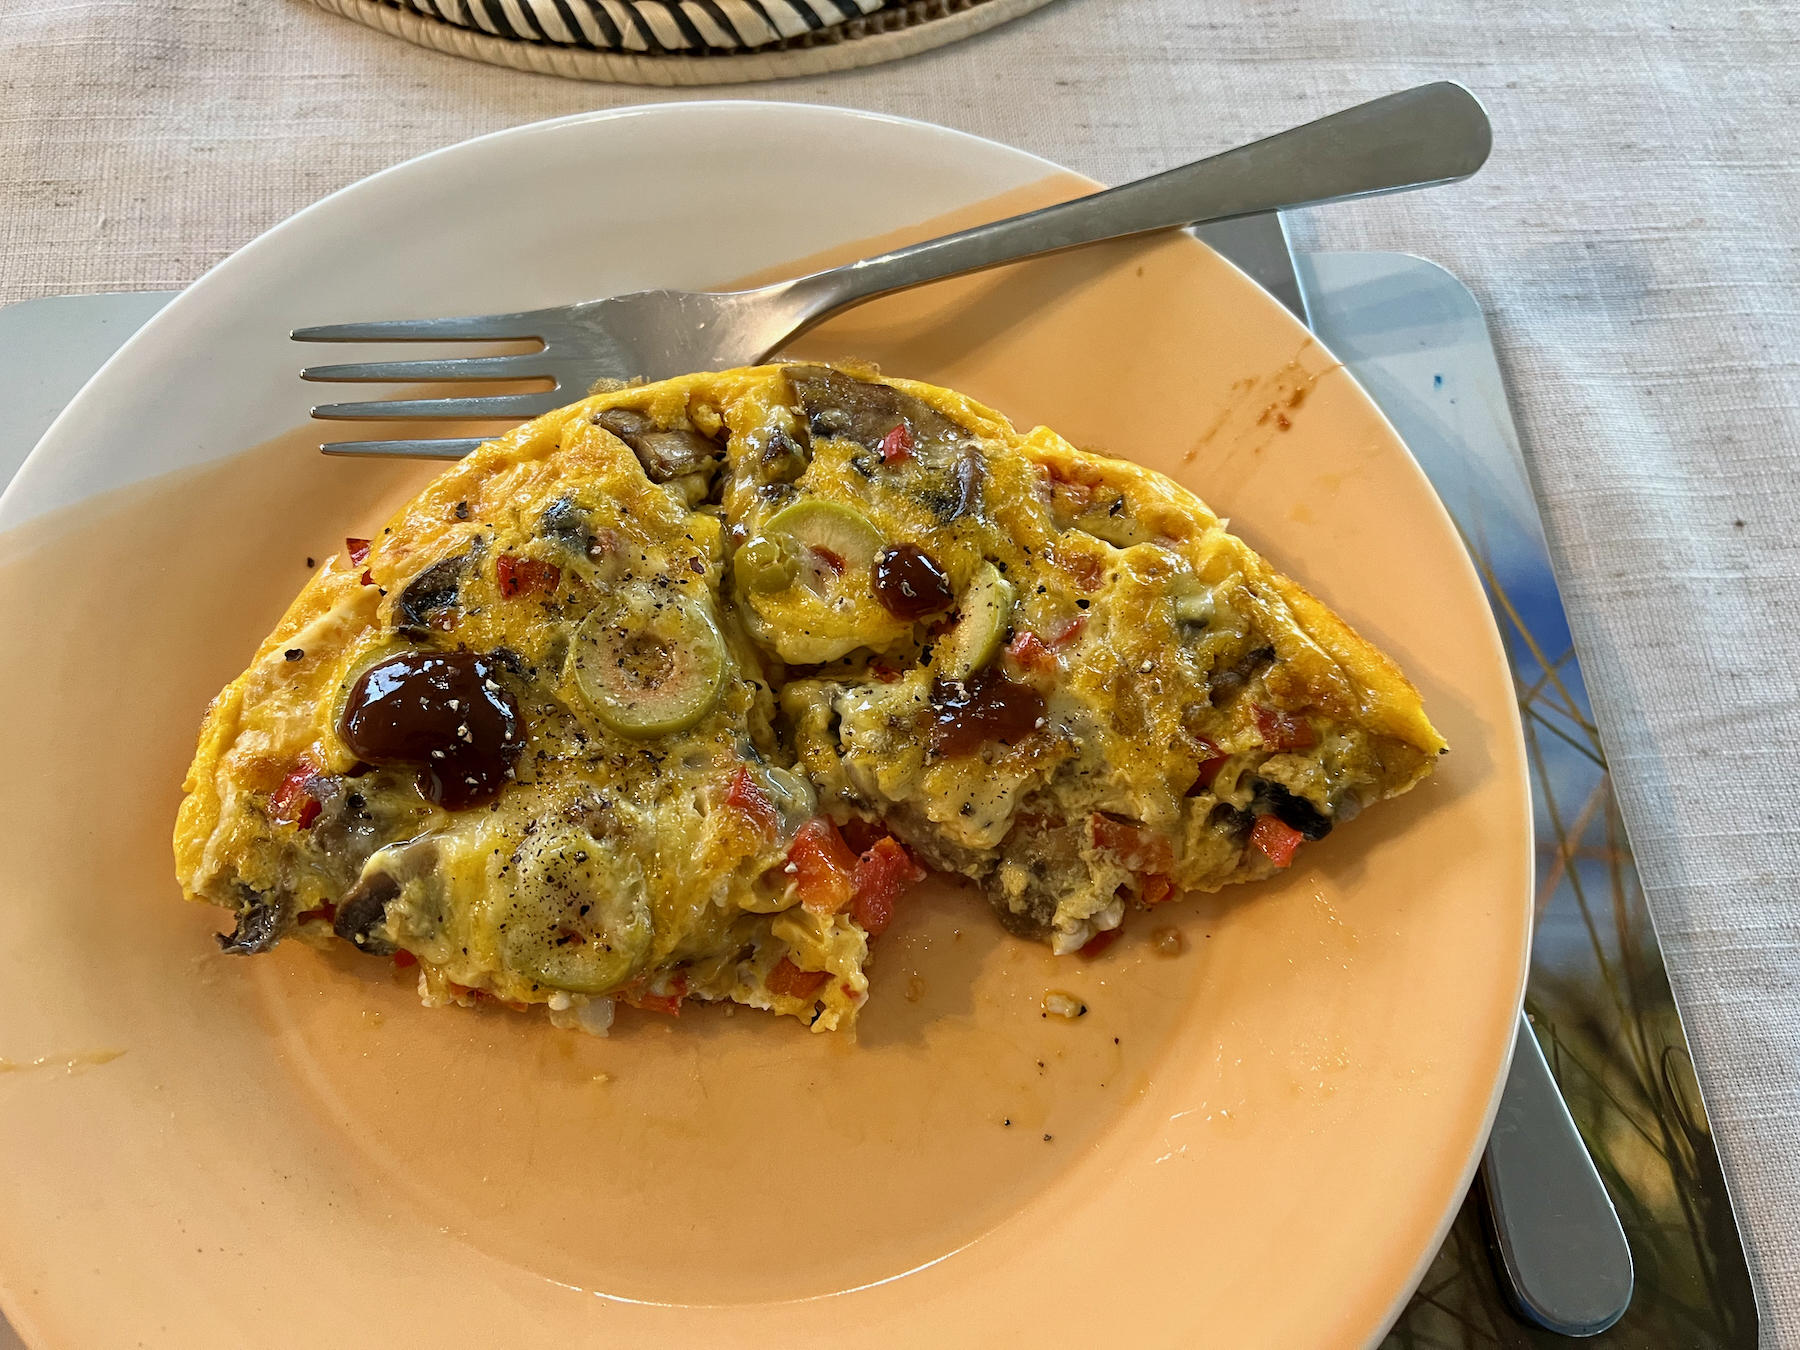 On a plate: half an omelette with cheese, olives, tomatoes and other ingredients. 